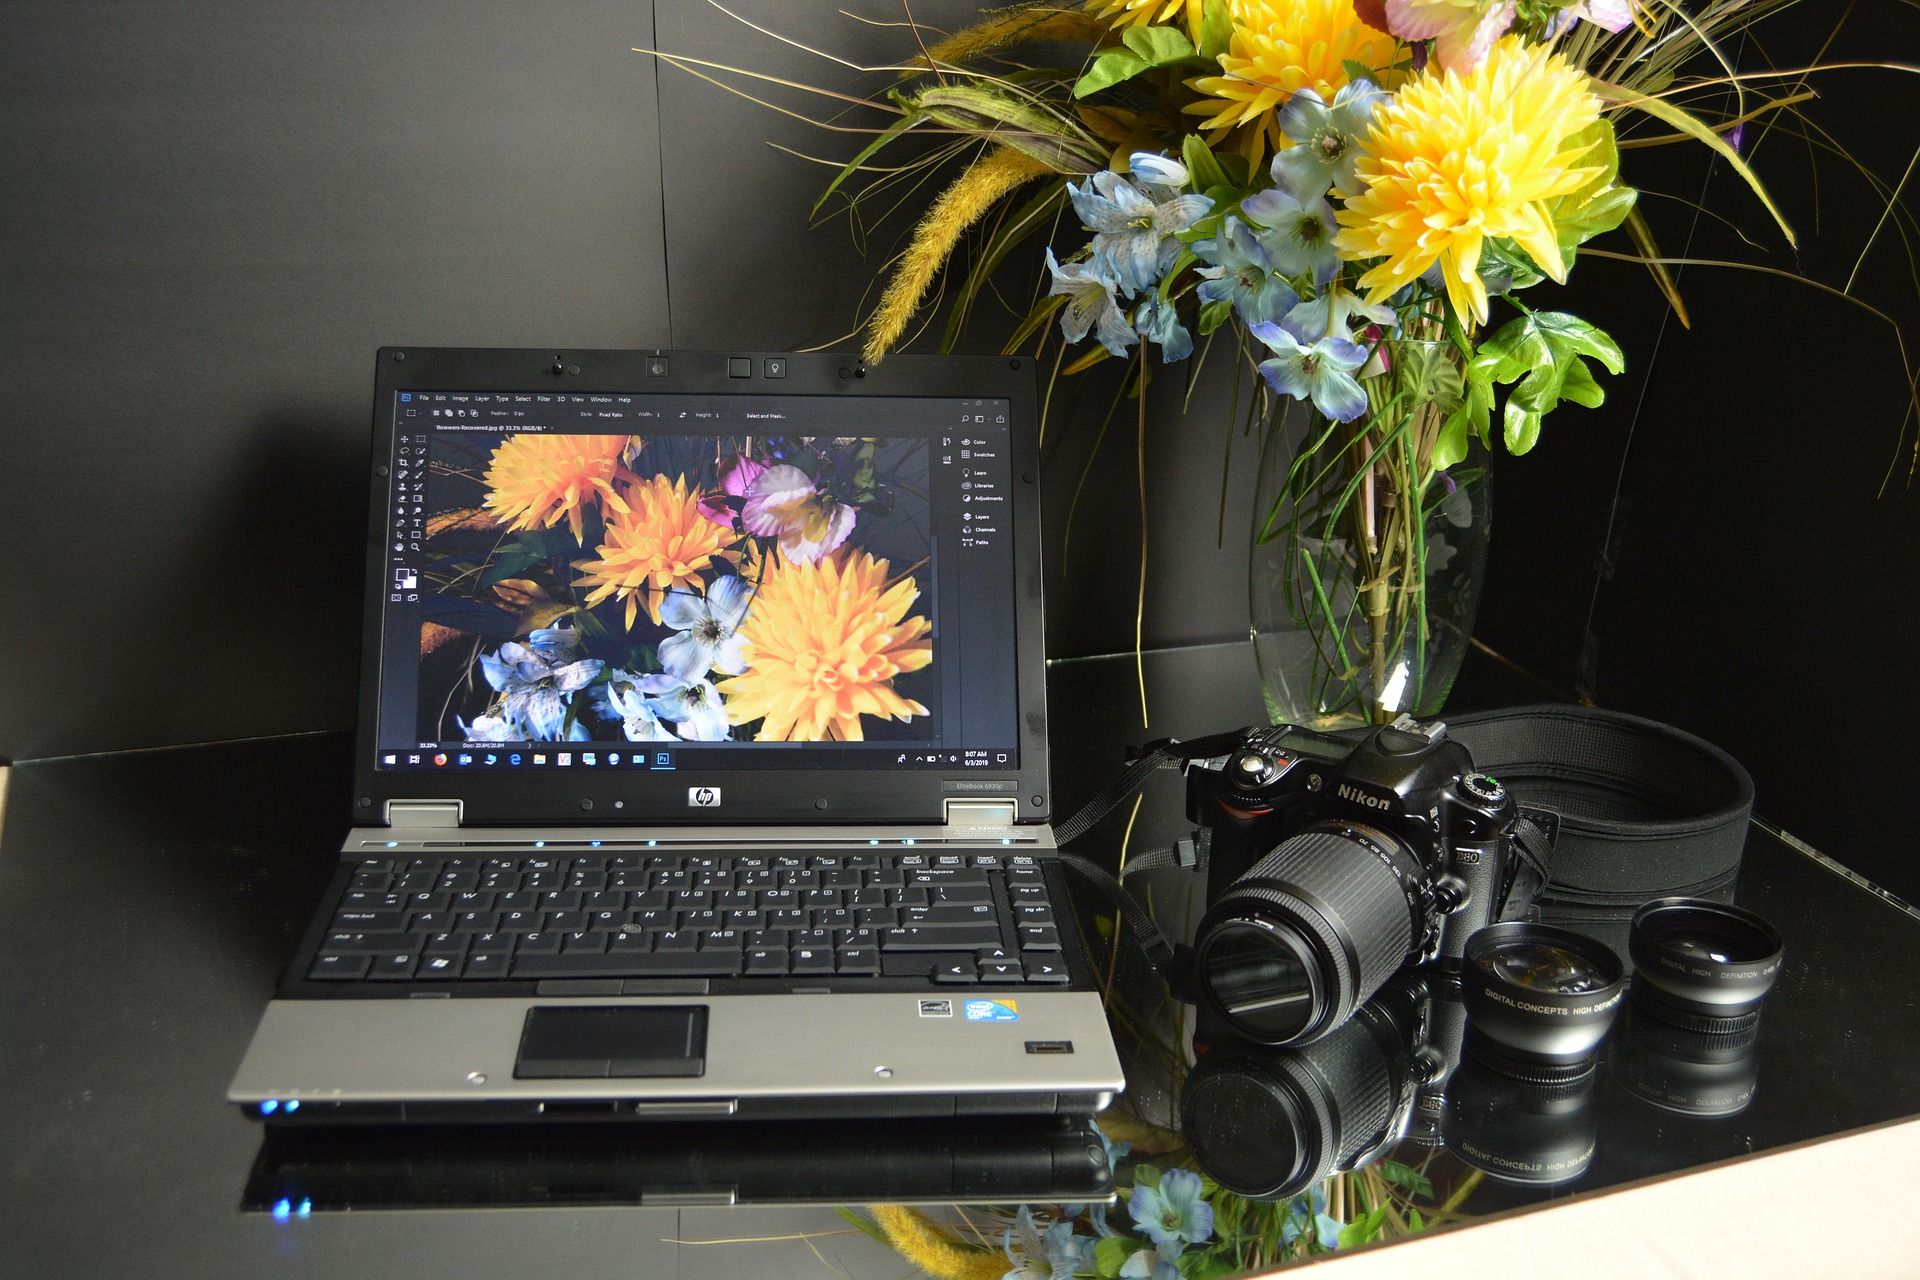 Laptop showing photo editing software and camera